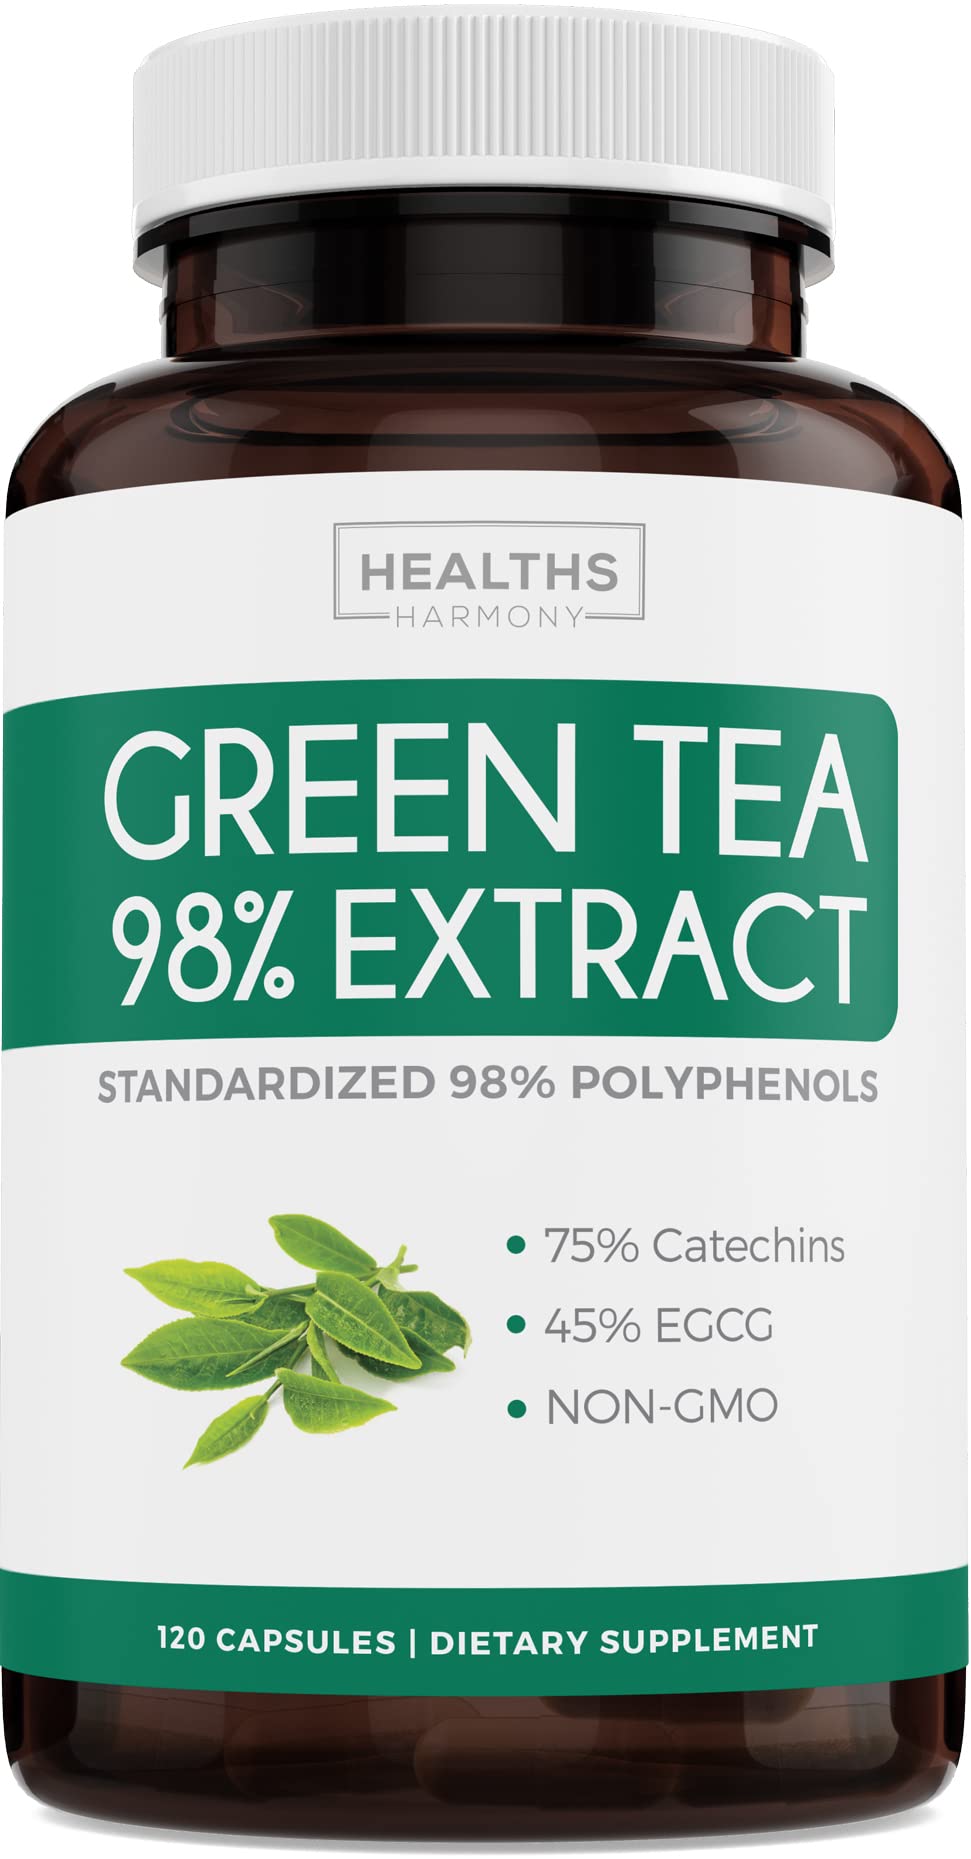 Book Cover Green Tea 98% Extract with EGCG - 120 Capsules (Non-GMO) for Natural Metabolism Boost - Leaf Polyphenol Catechins - Antioxidant Supplement - 1000mg (500mg per Capsule)